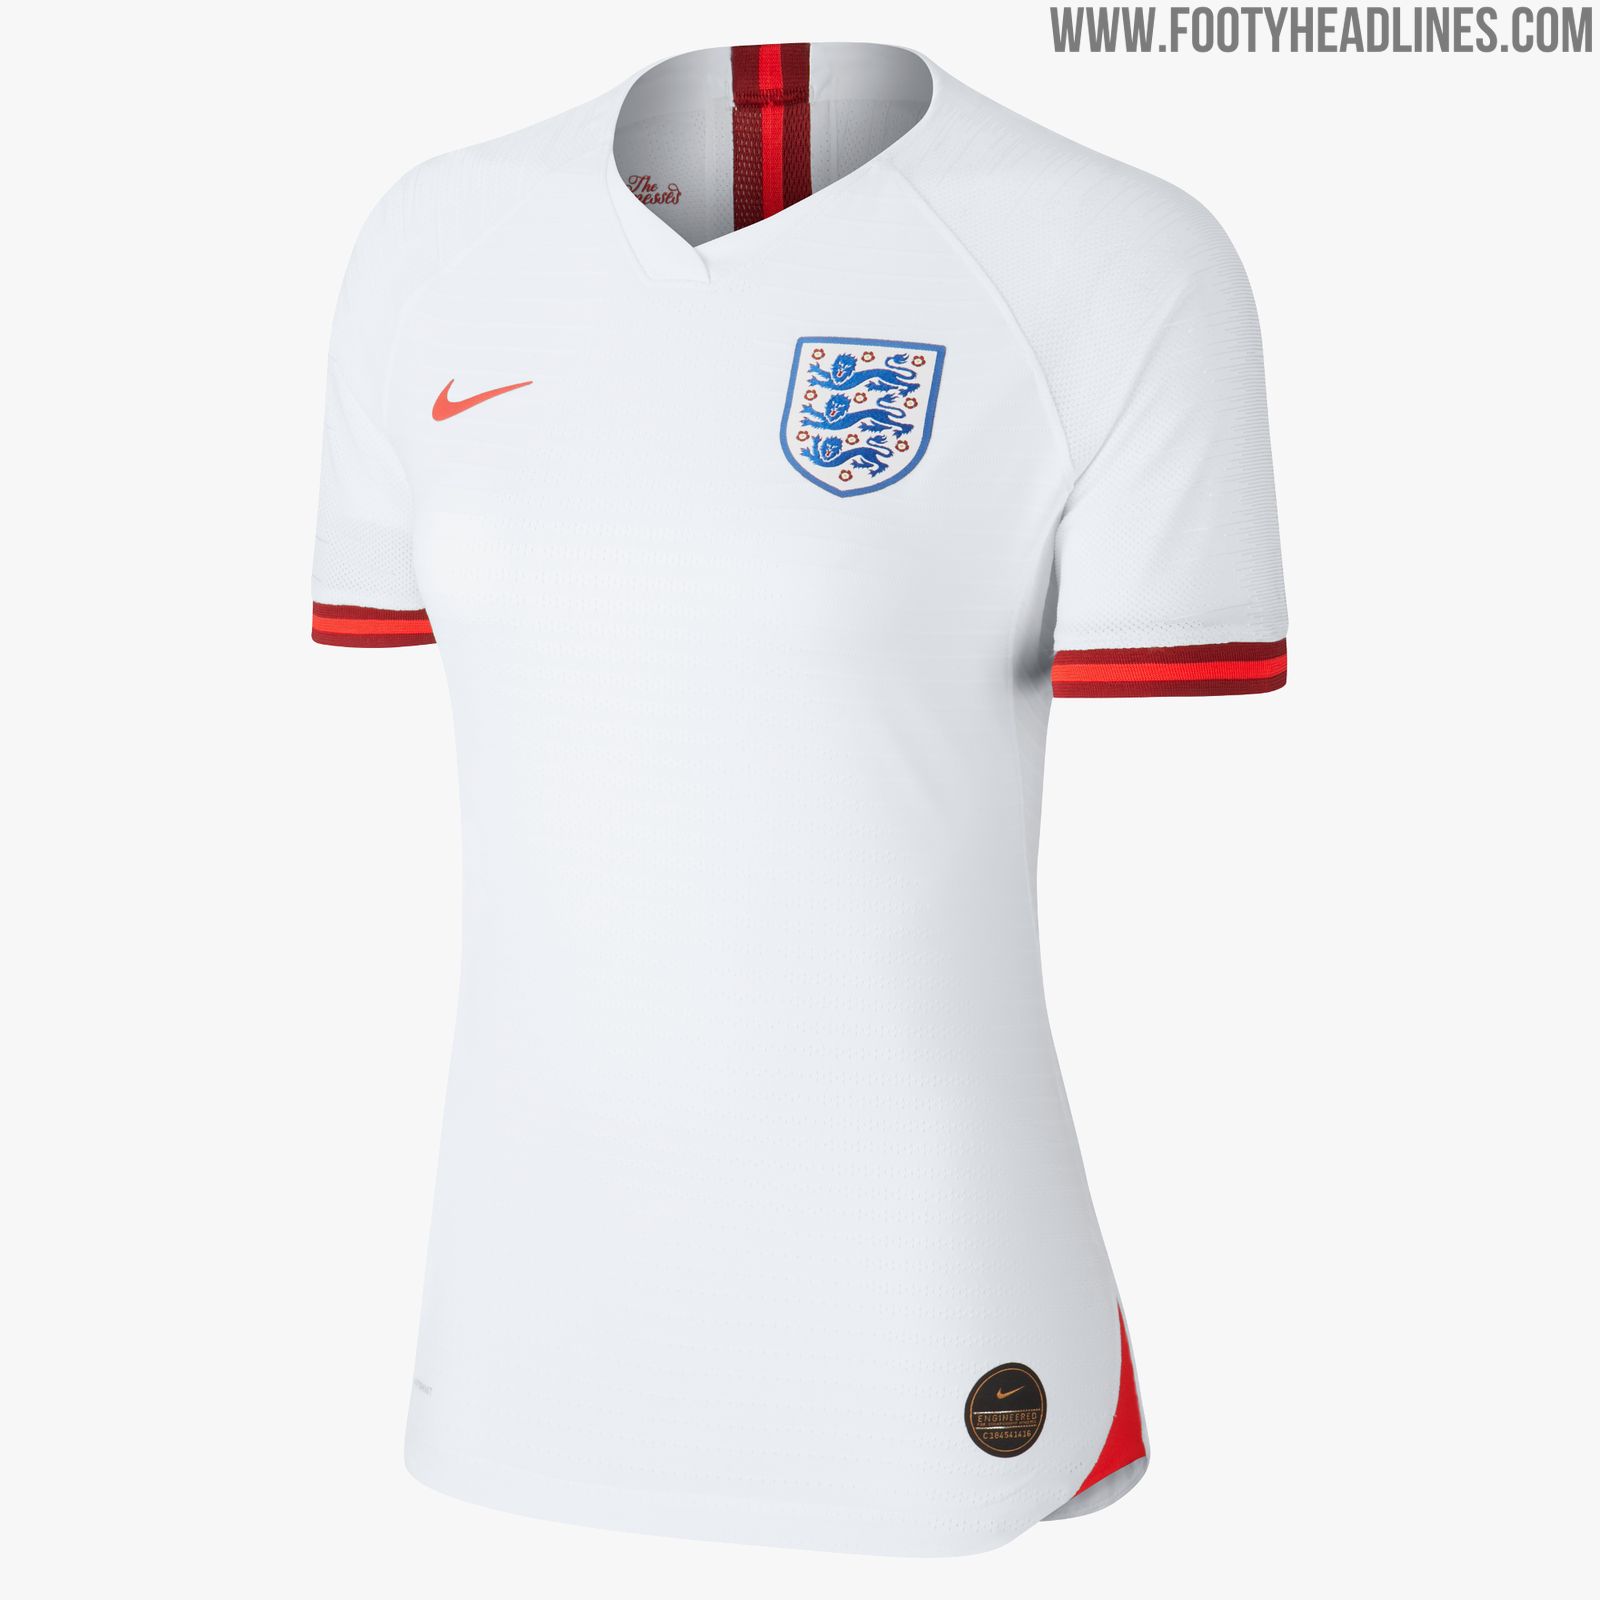 Nike 2019 Women's World Cup Kits Released England, France, USA and